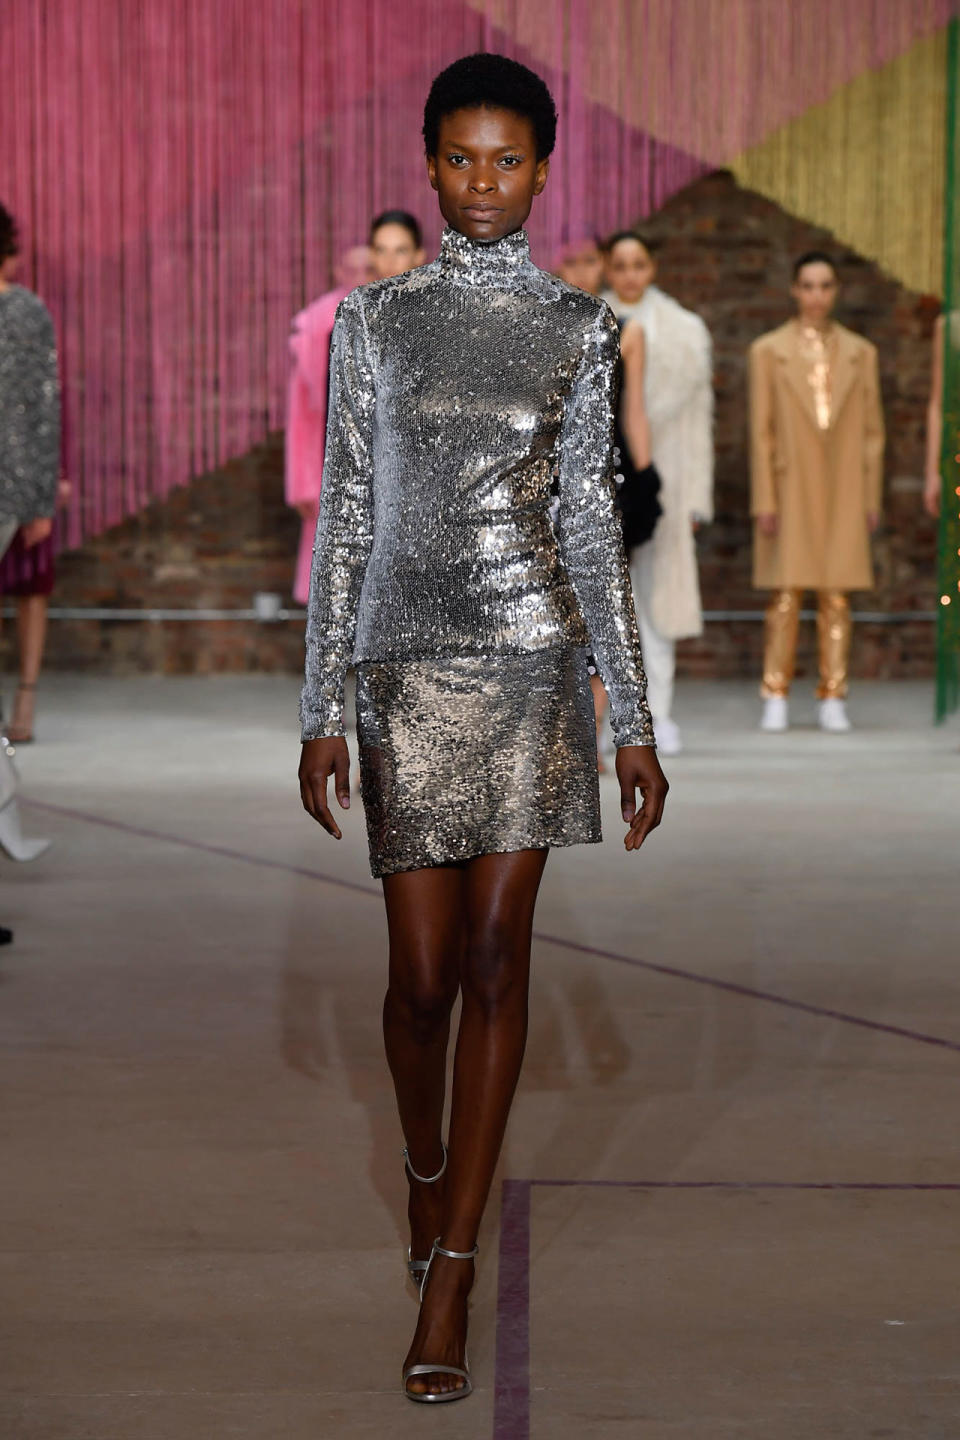 <p>Model wears a metallic sequin top and skirt at the Milly Fall/Winter 2018 show. (Photo: Courtesy of Greg Kessler) </p>